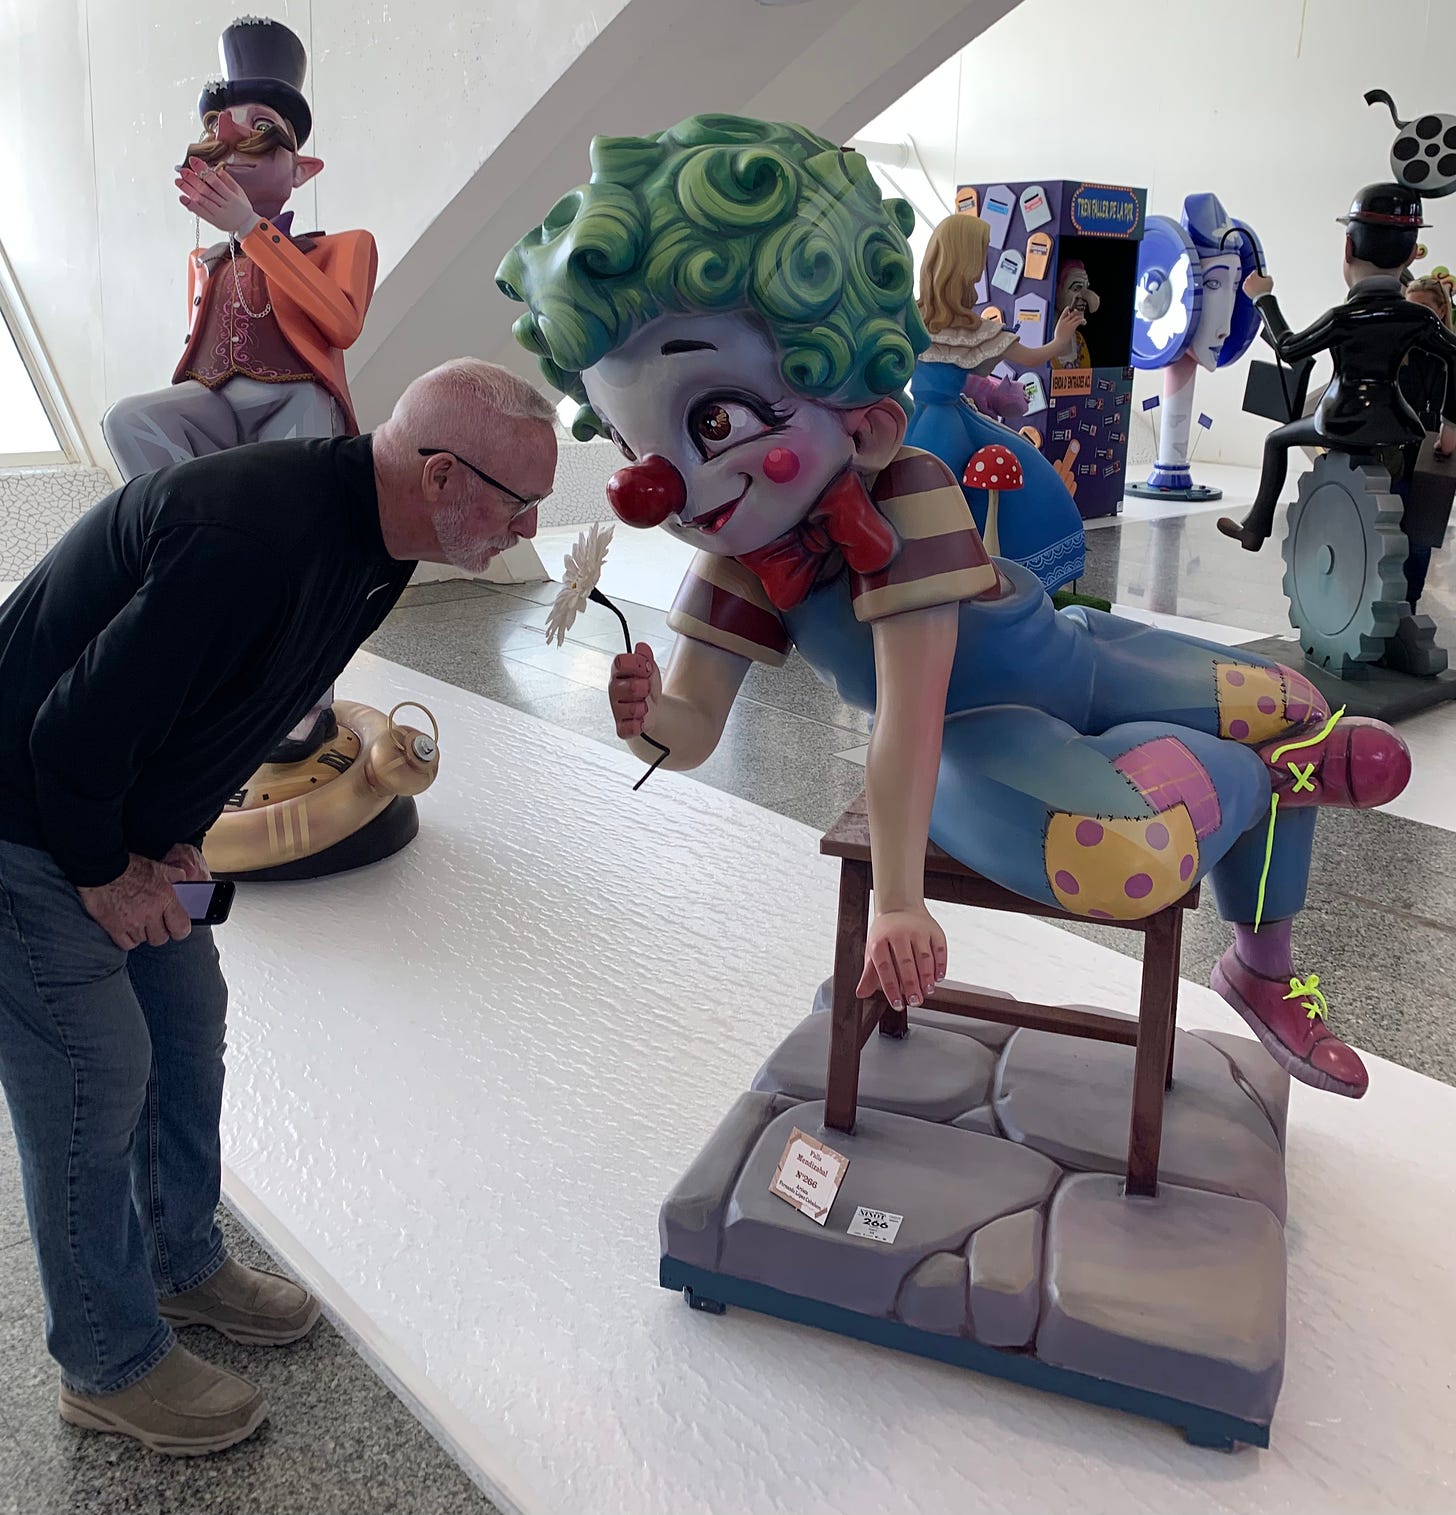 Jim leans over to smell a flower proffered by a childlike green-haired clown